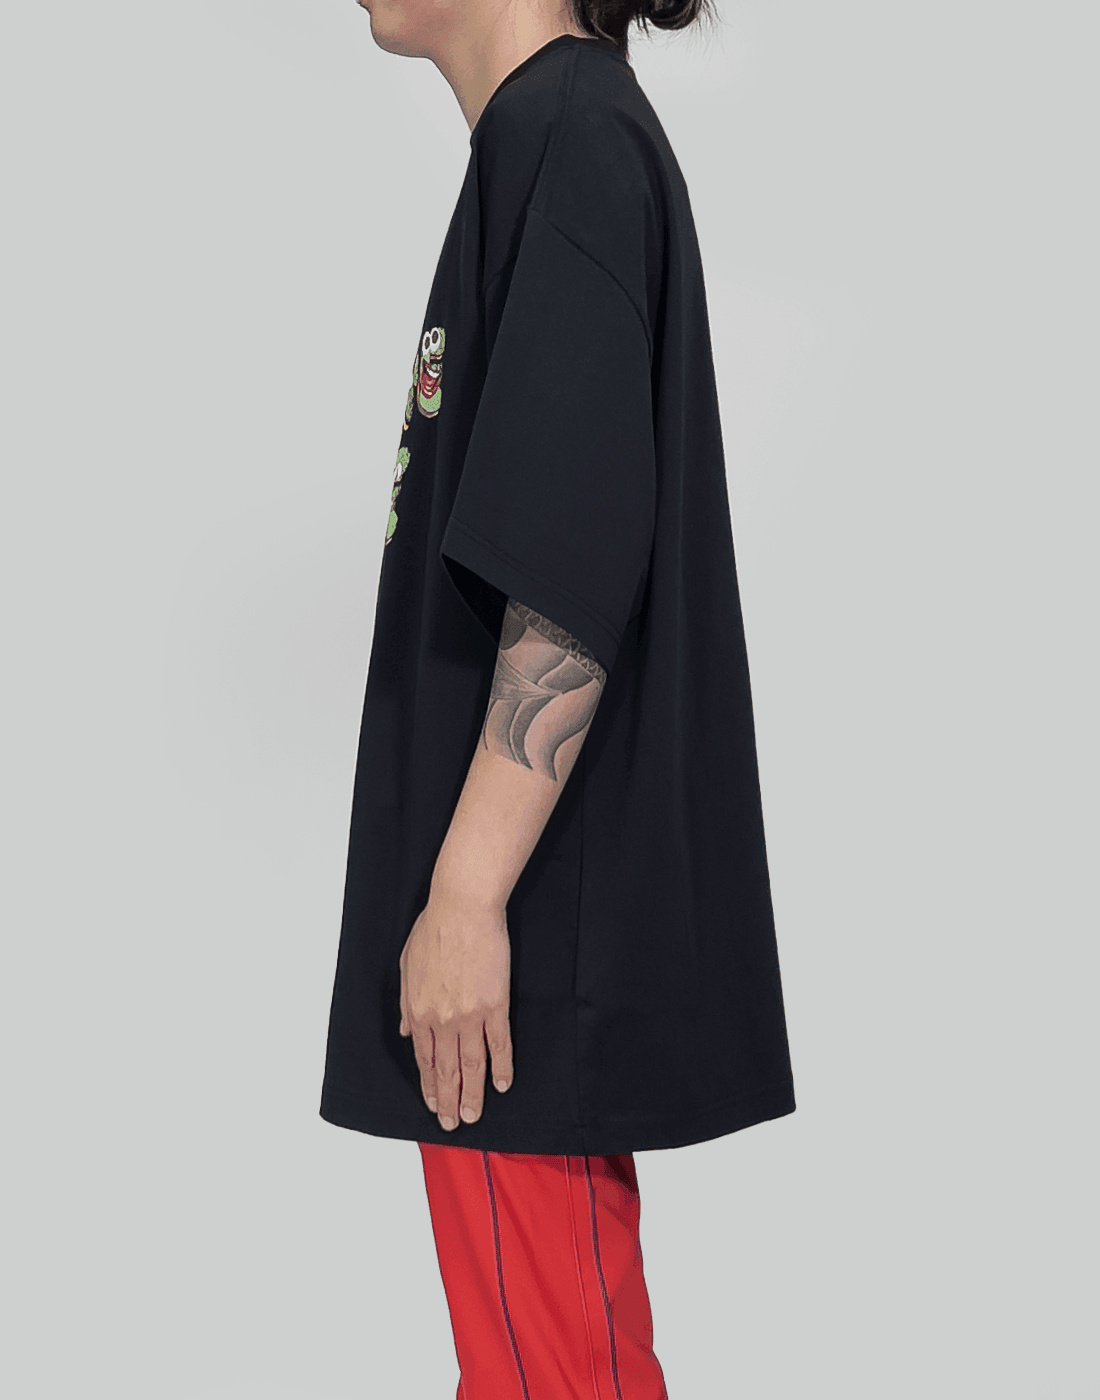 Martine Rose RELAX.S/S FIT T-SHIRT - 082plus